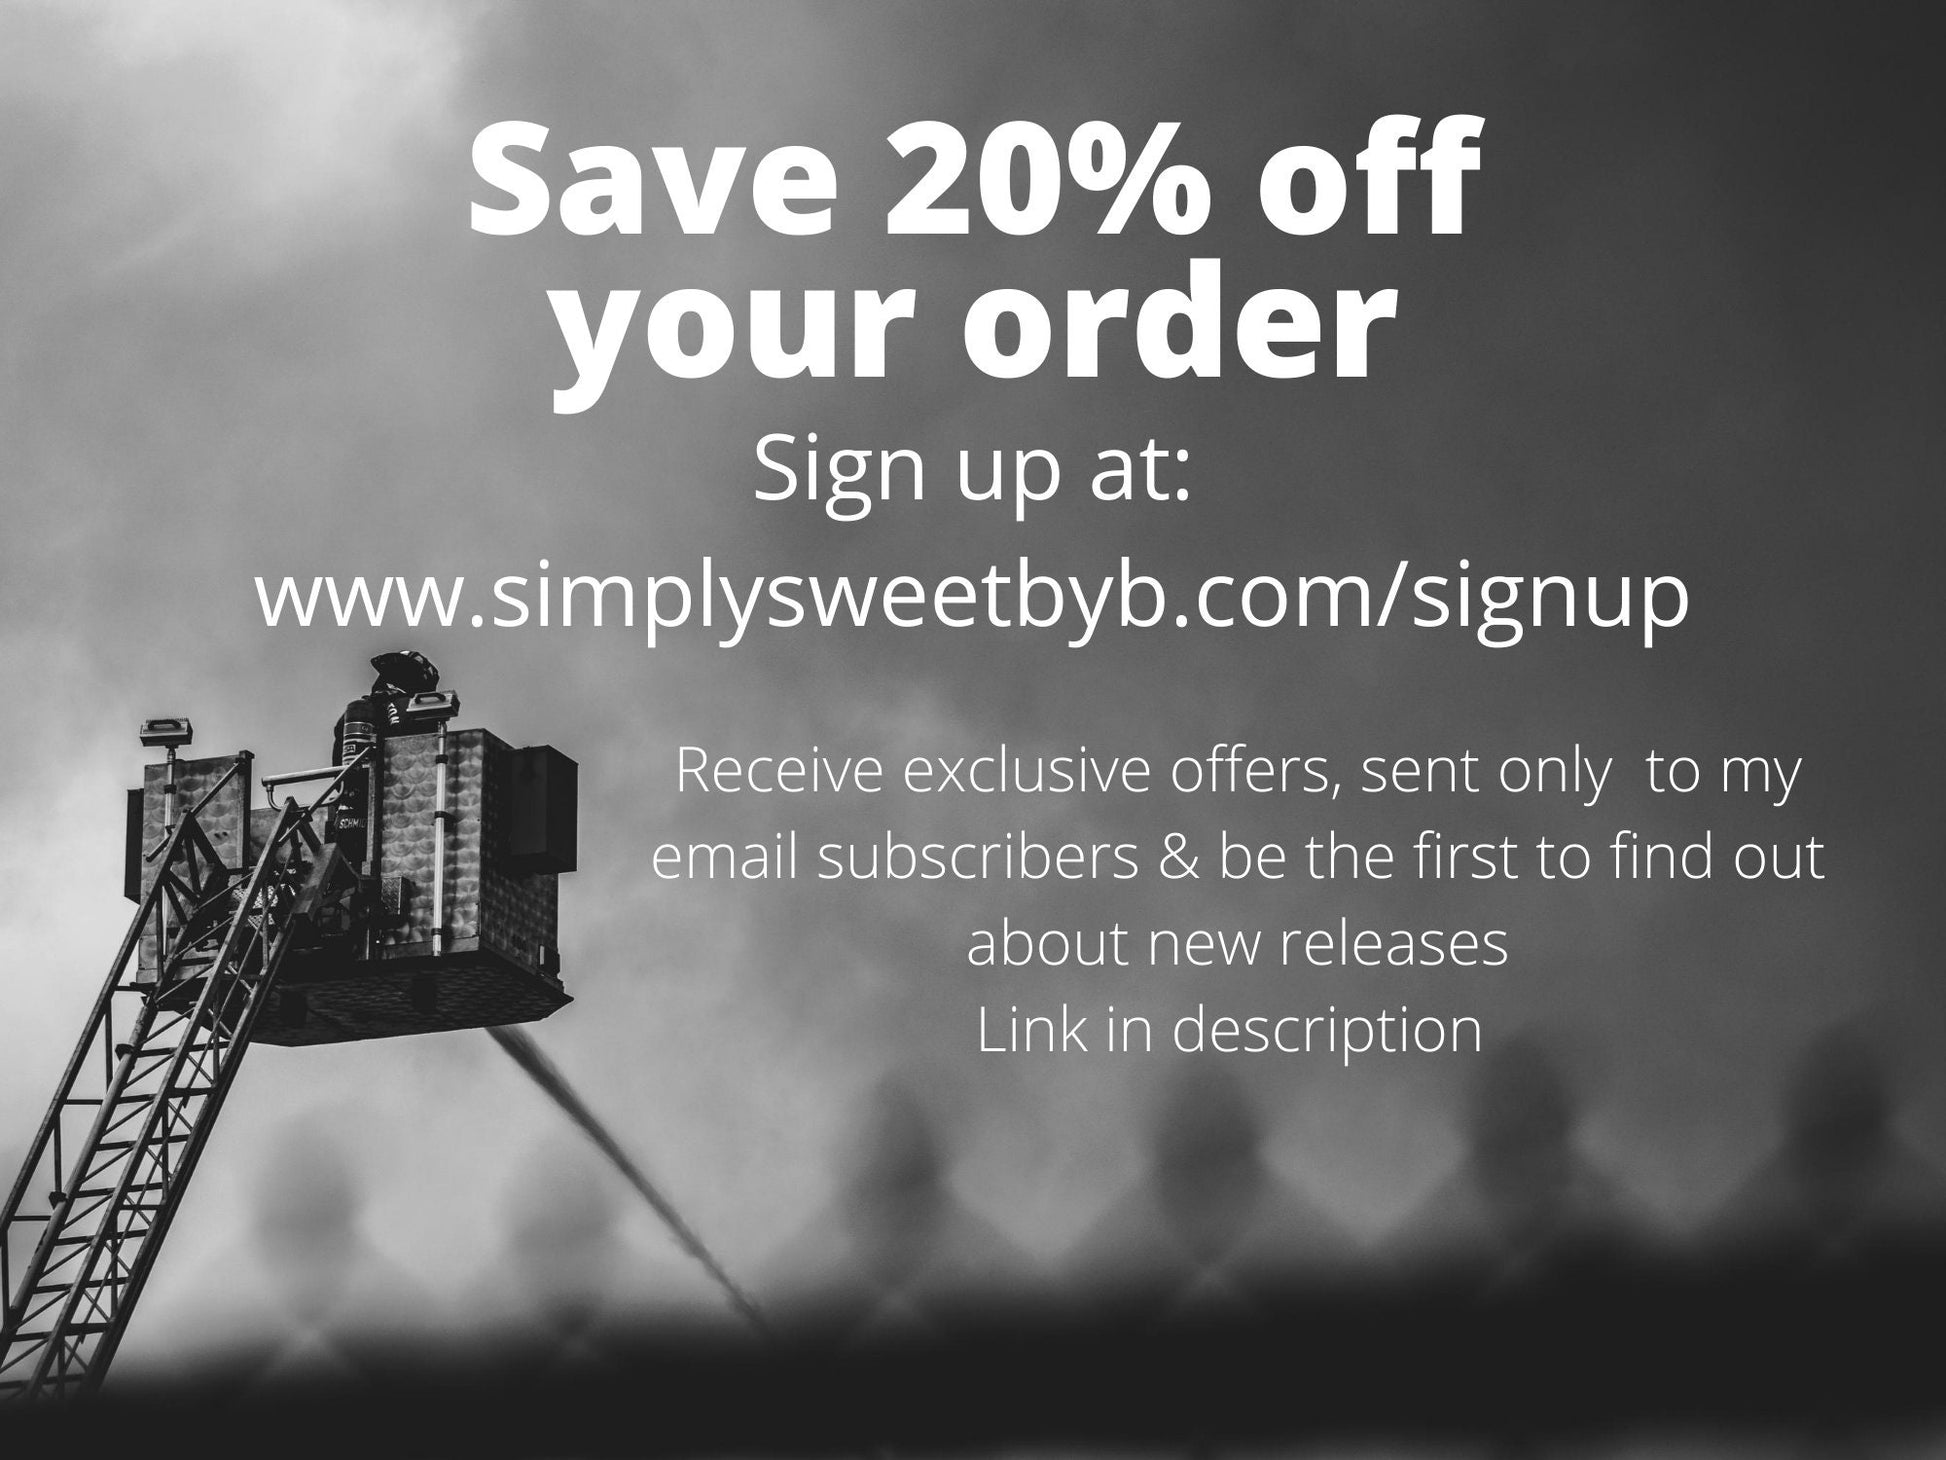 sign up for email list to save 20% now